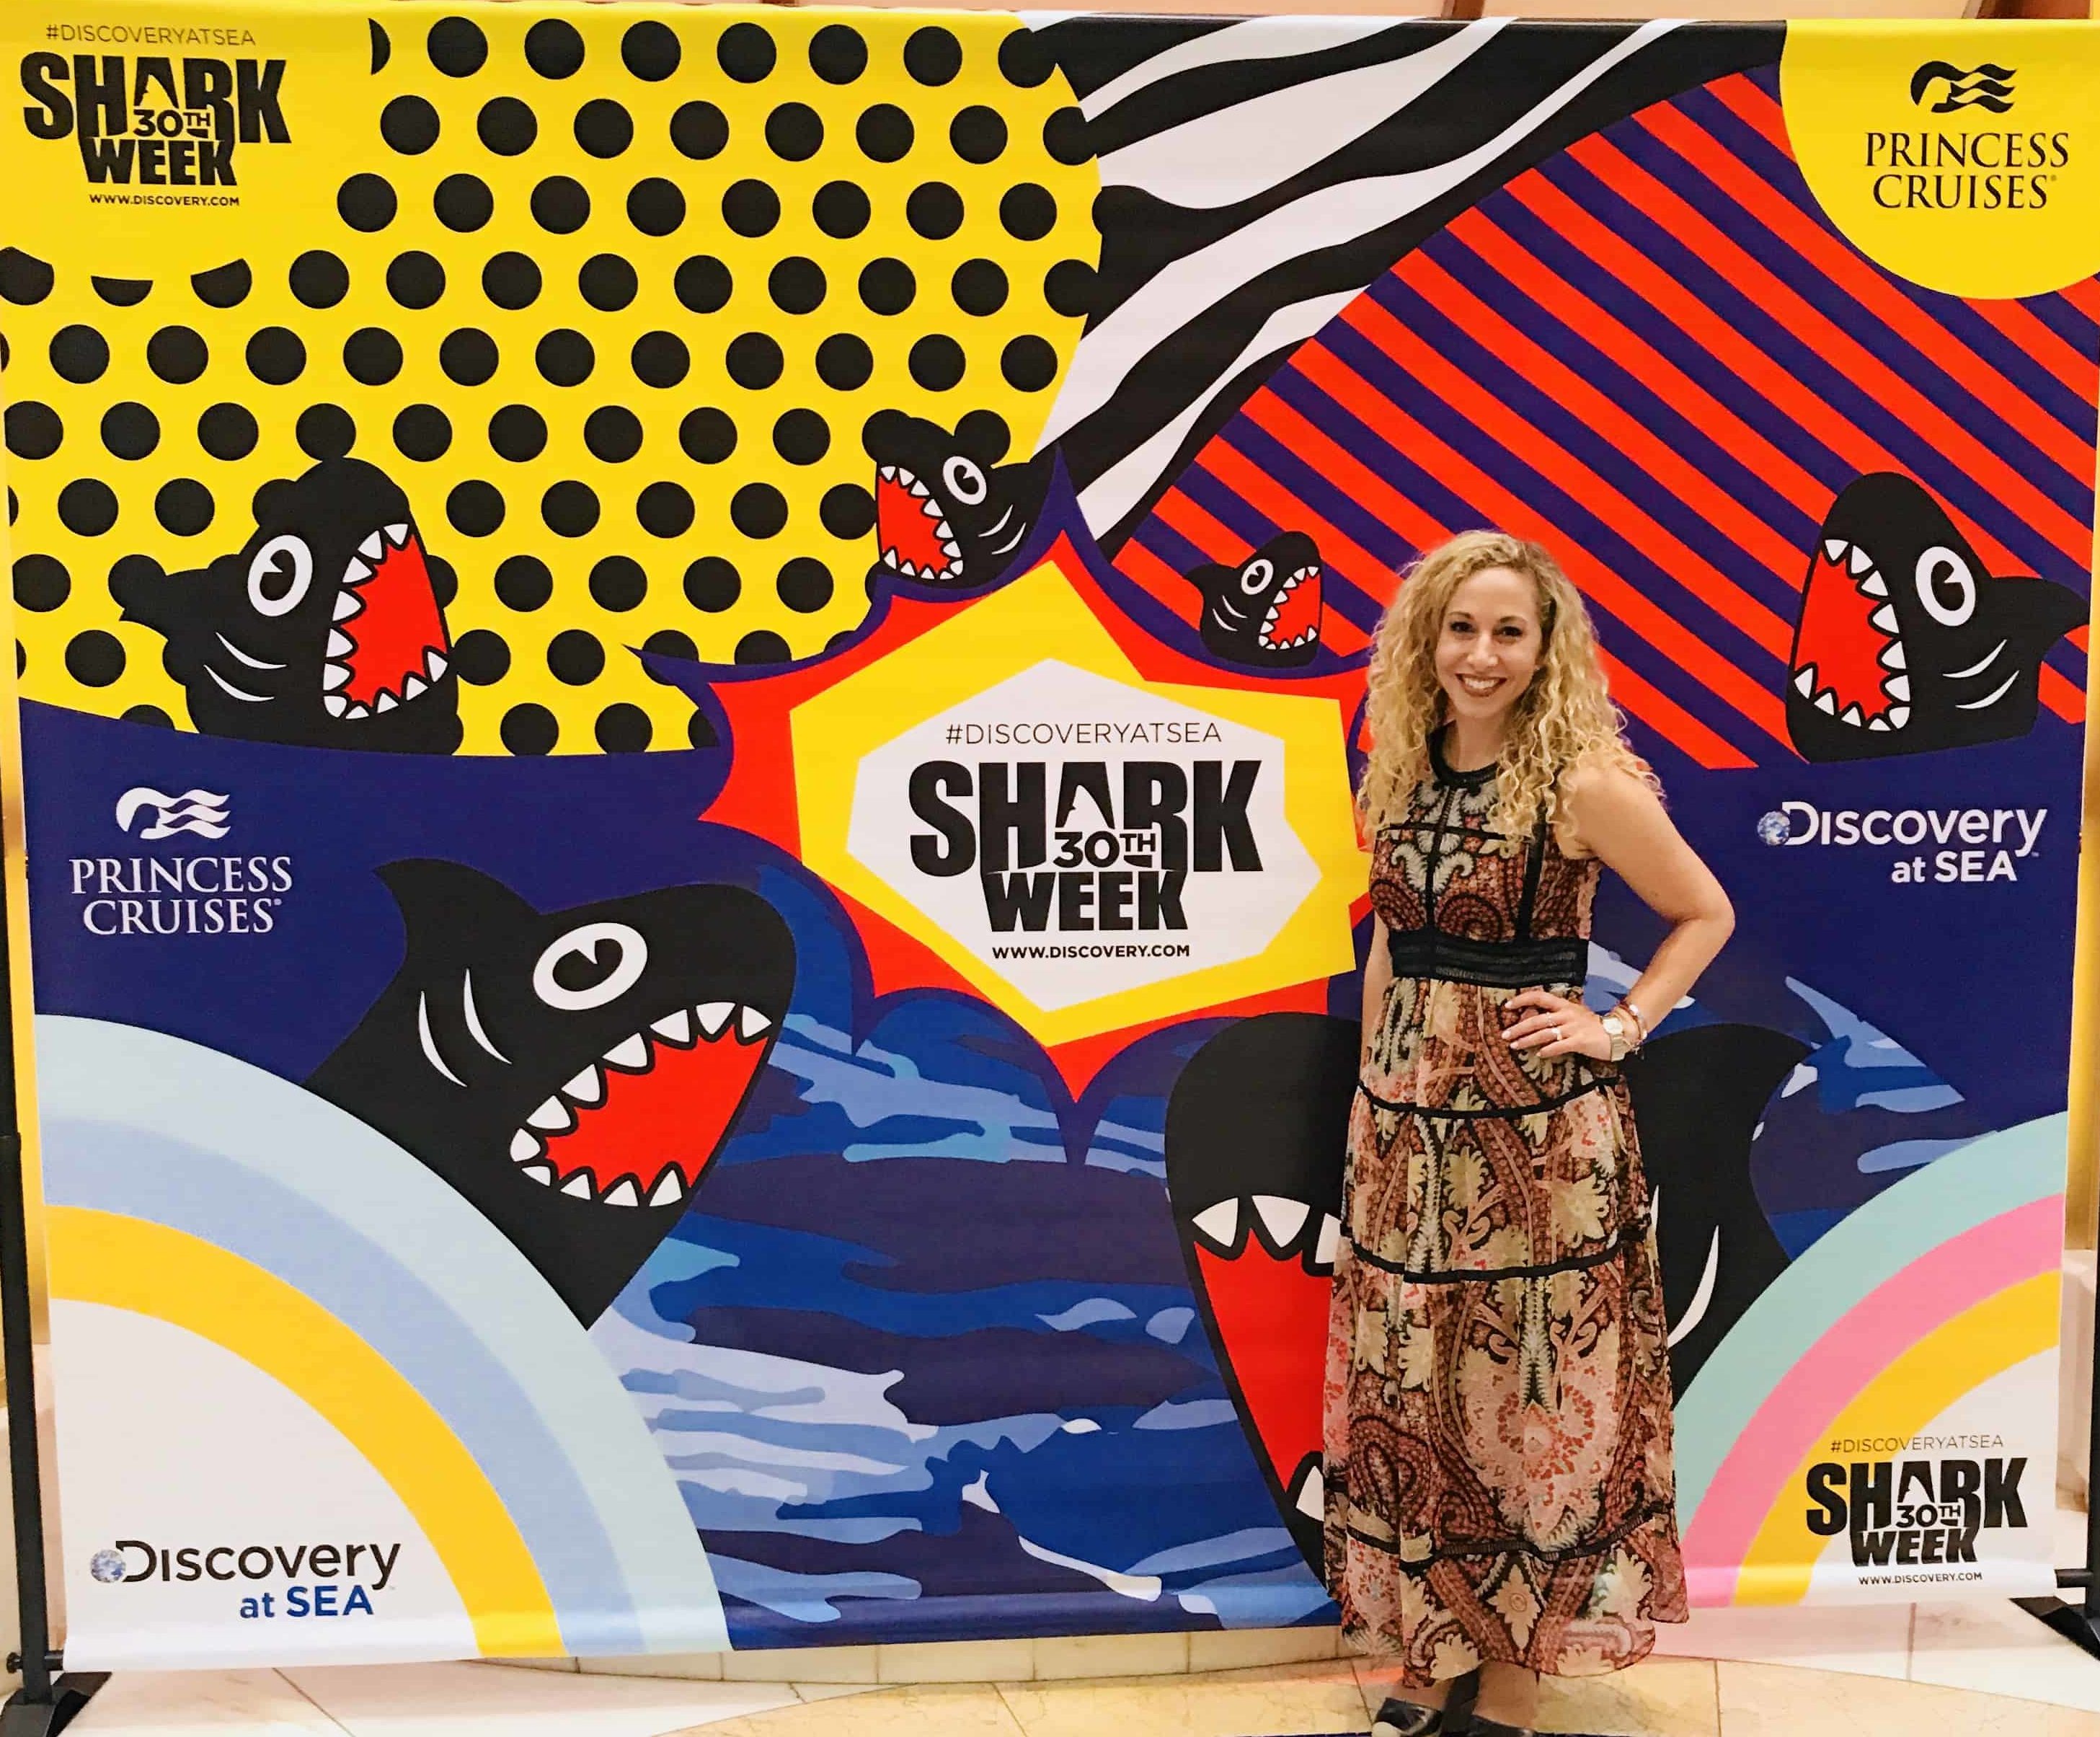 In celebration of the 30th anniversary of Discovery Channel’s Shark Week, Caribbean Princess launched exclusive “Summer of Shark” activities.